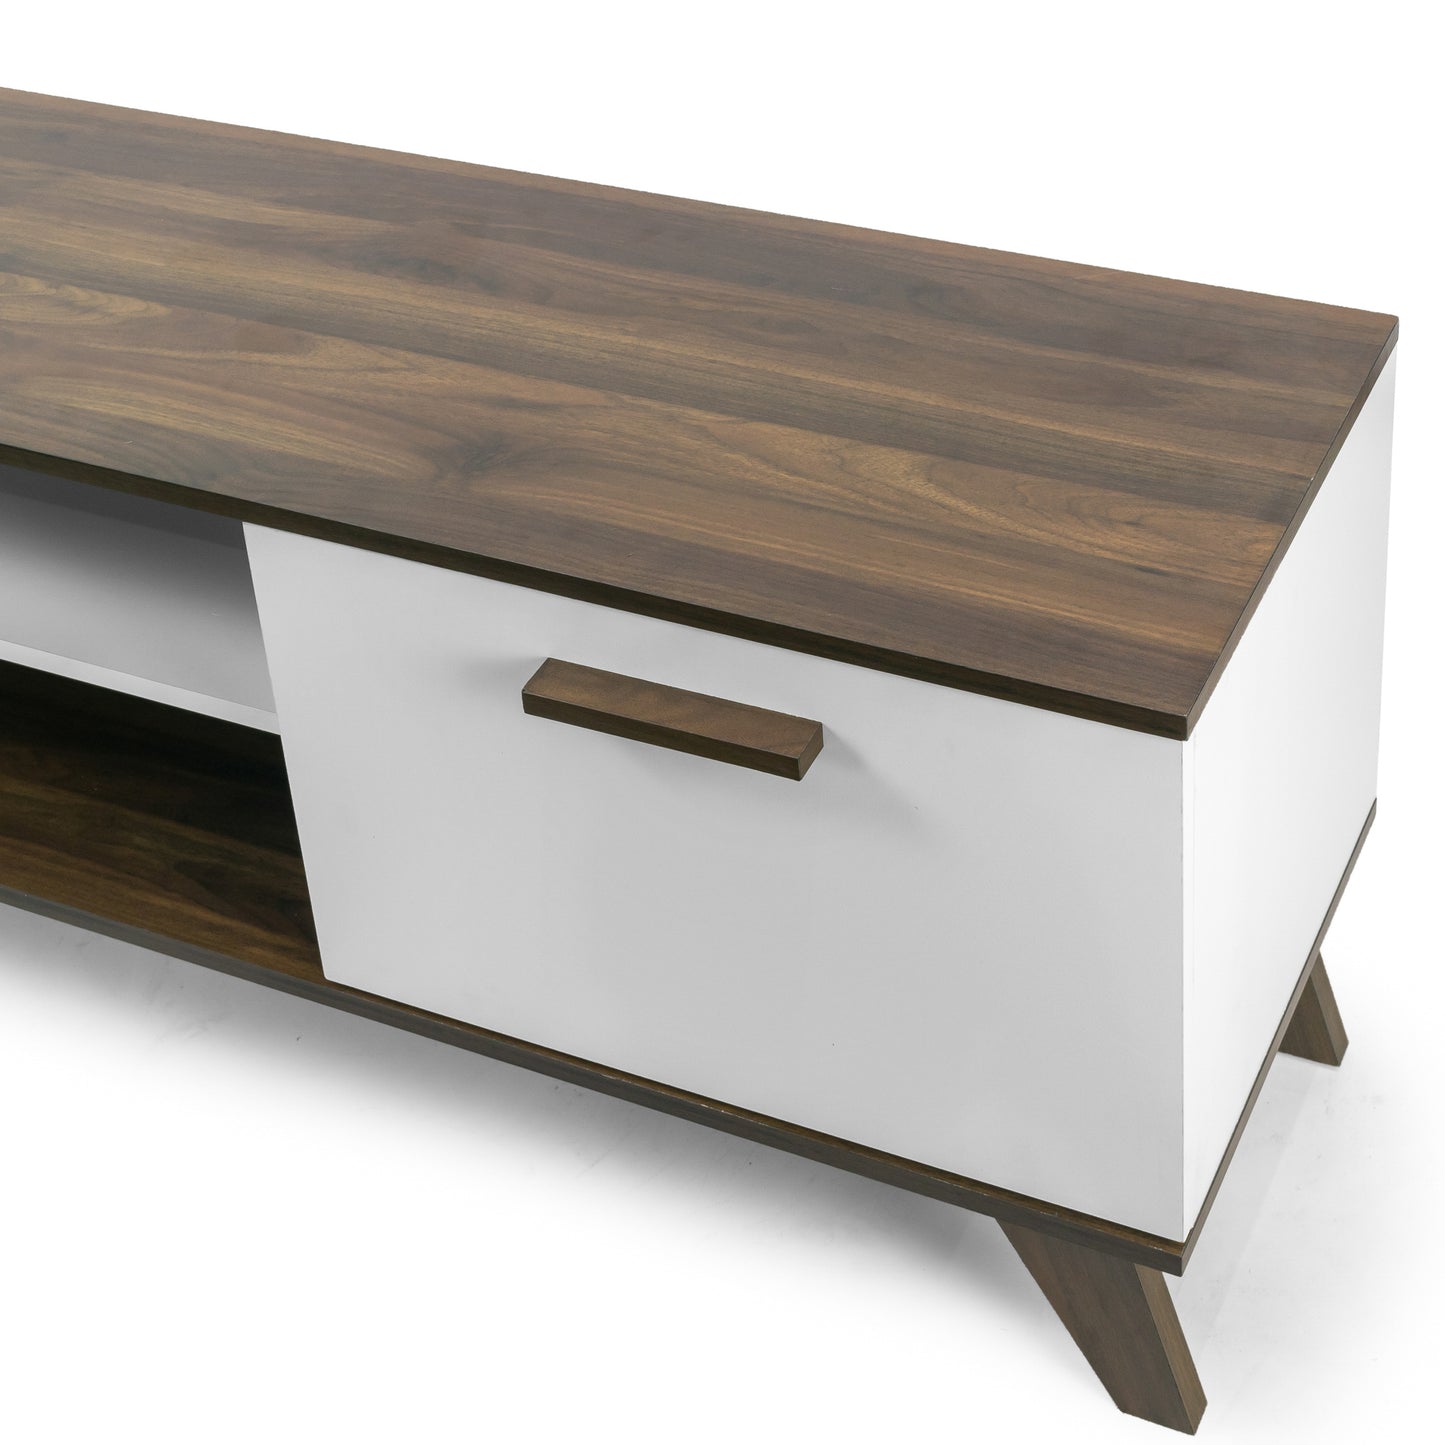 Annis TV Stand Walnut Finish with Contrasting White Door